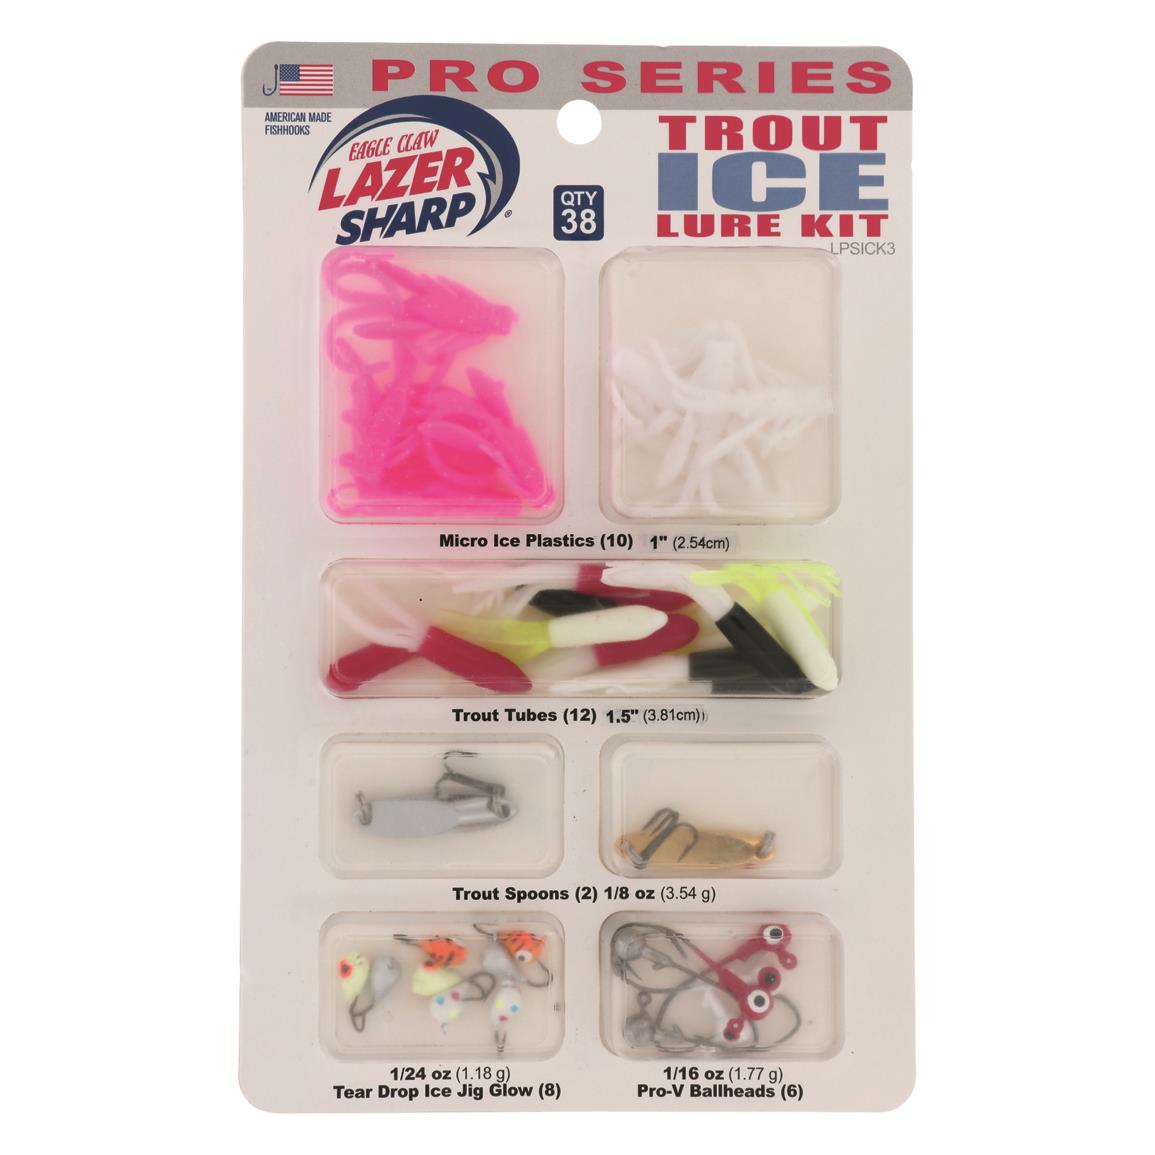 Eagle Claw Pro Series Trout Ice Lure Kit, 38 Piece